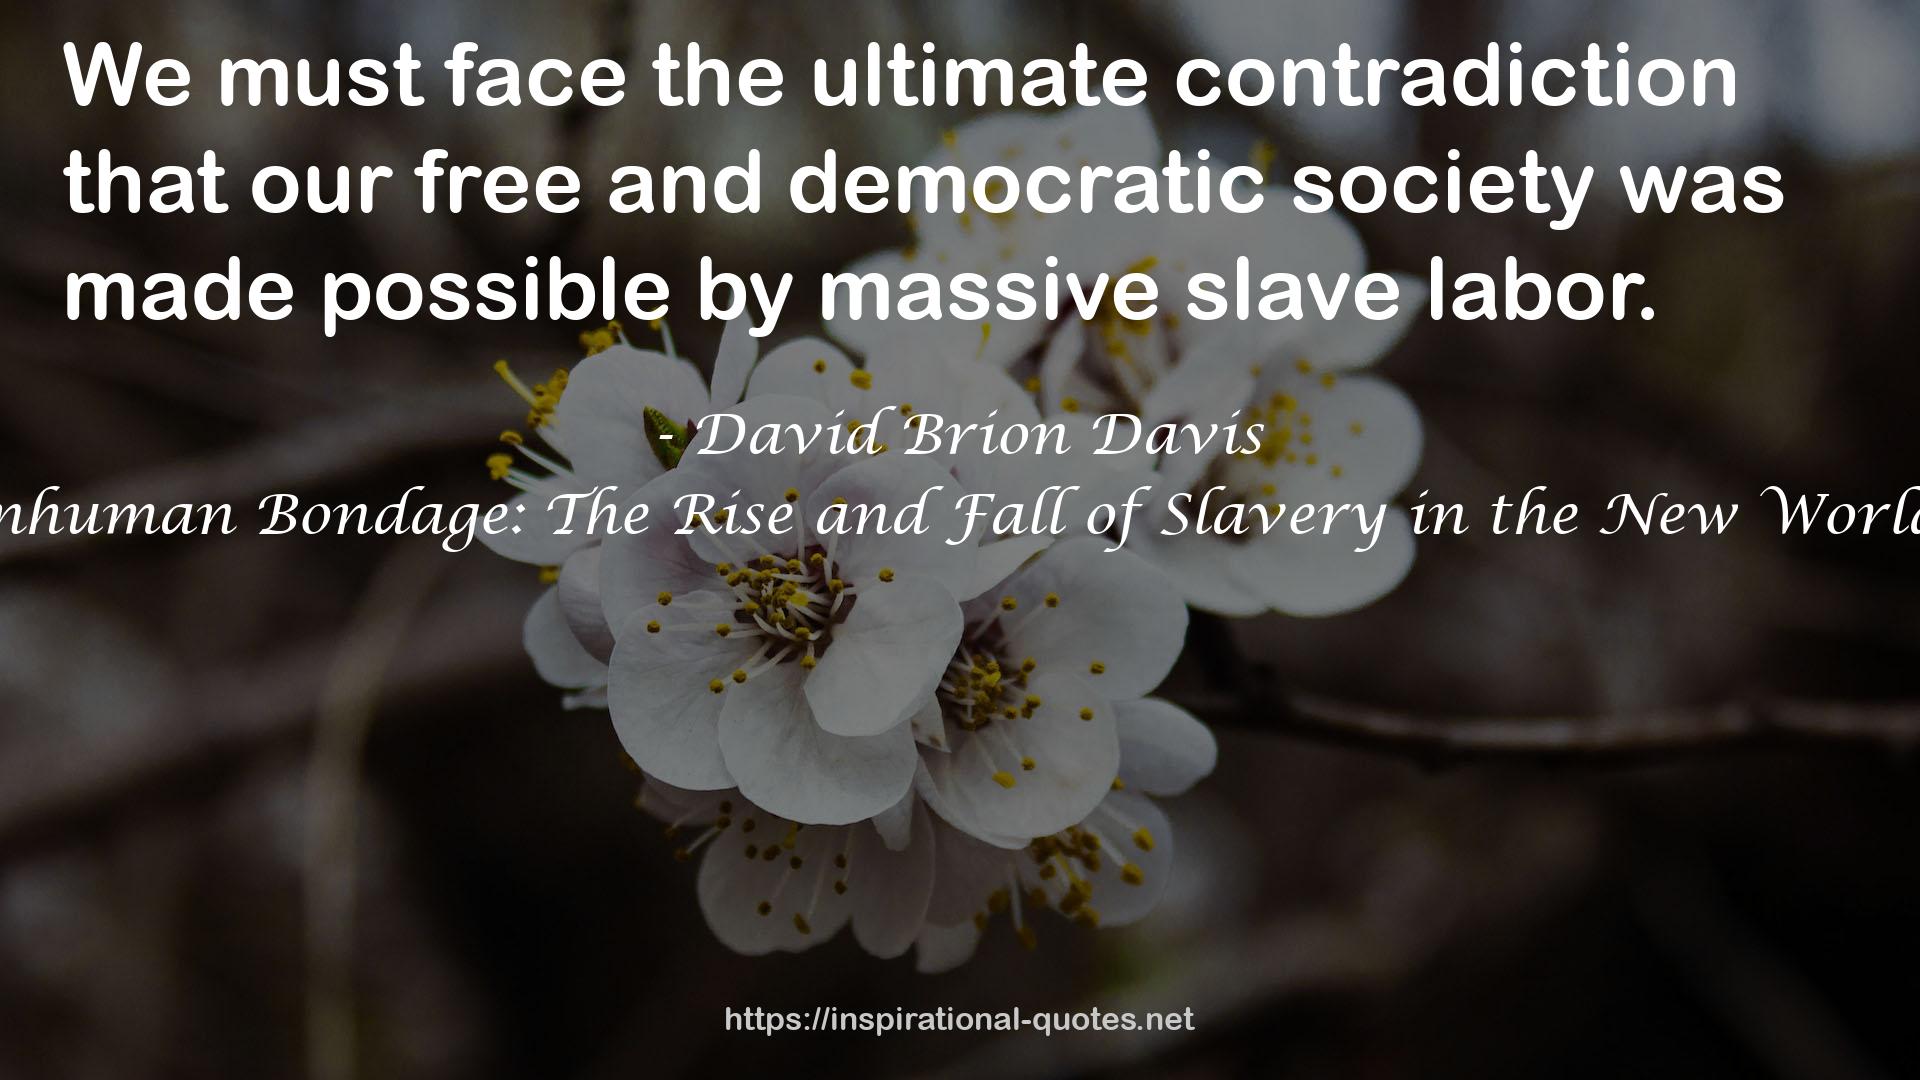 Inhuman Bondage: The Rise and Fall of Slavery in the New World QUOTES